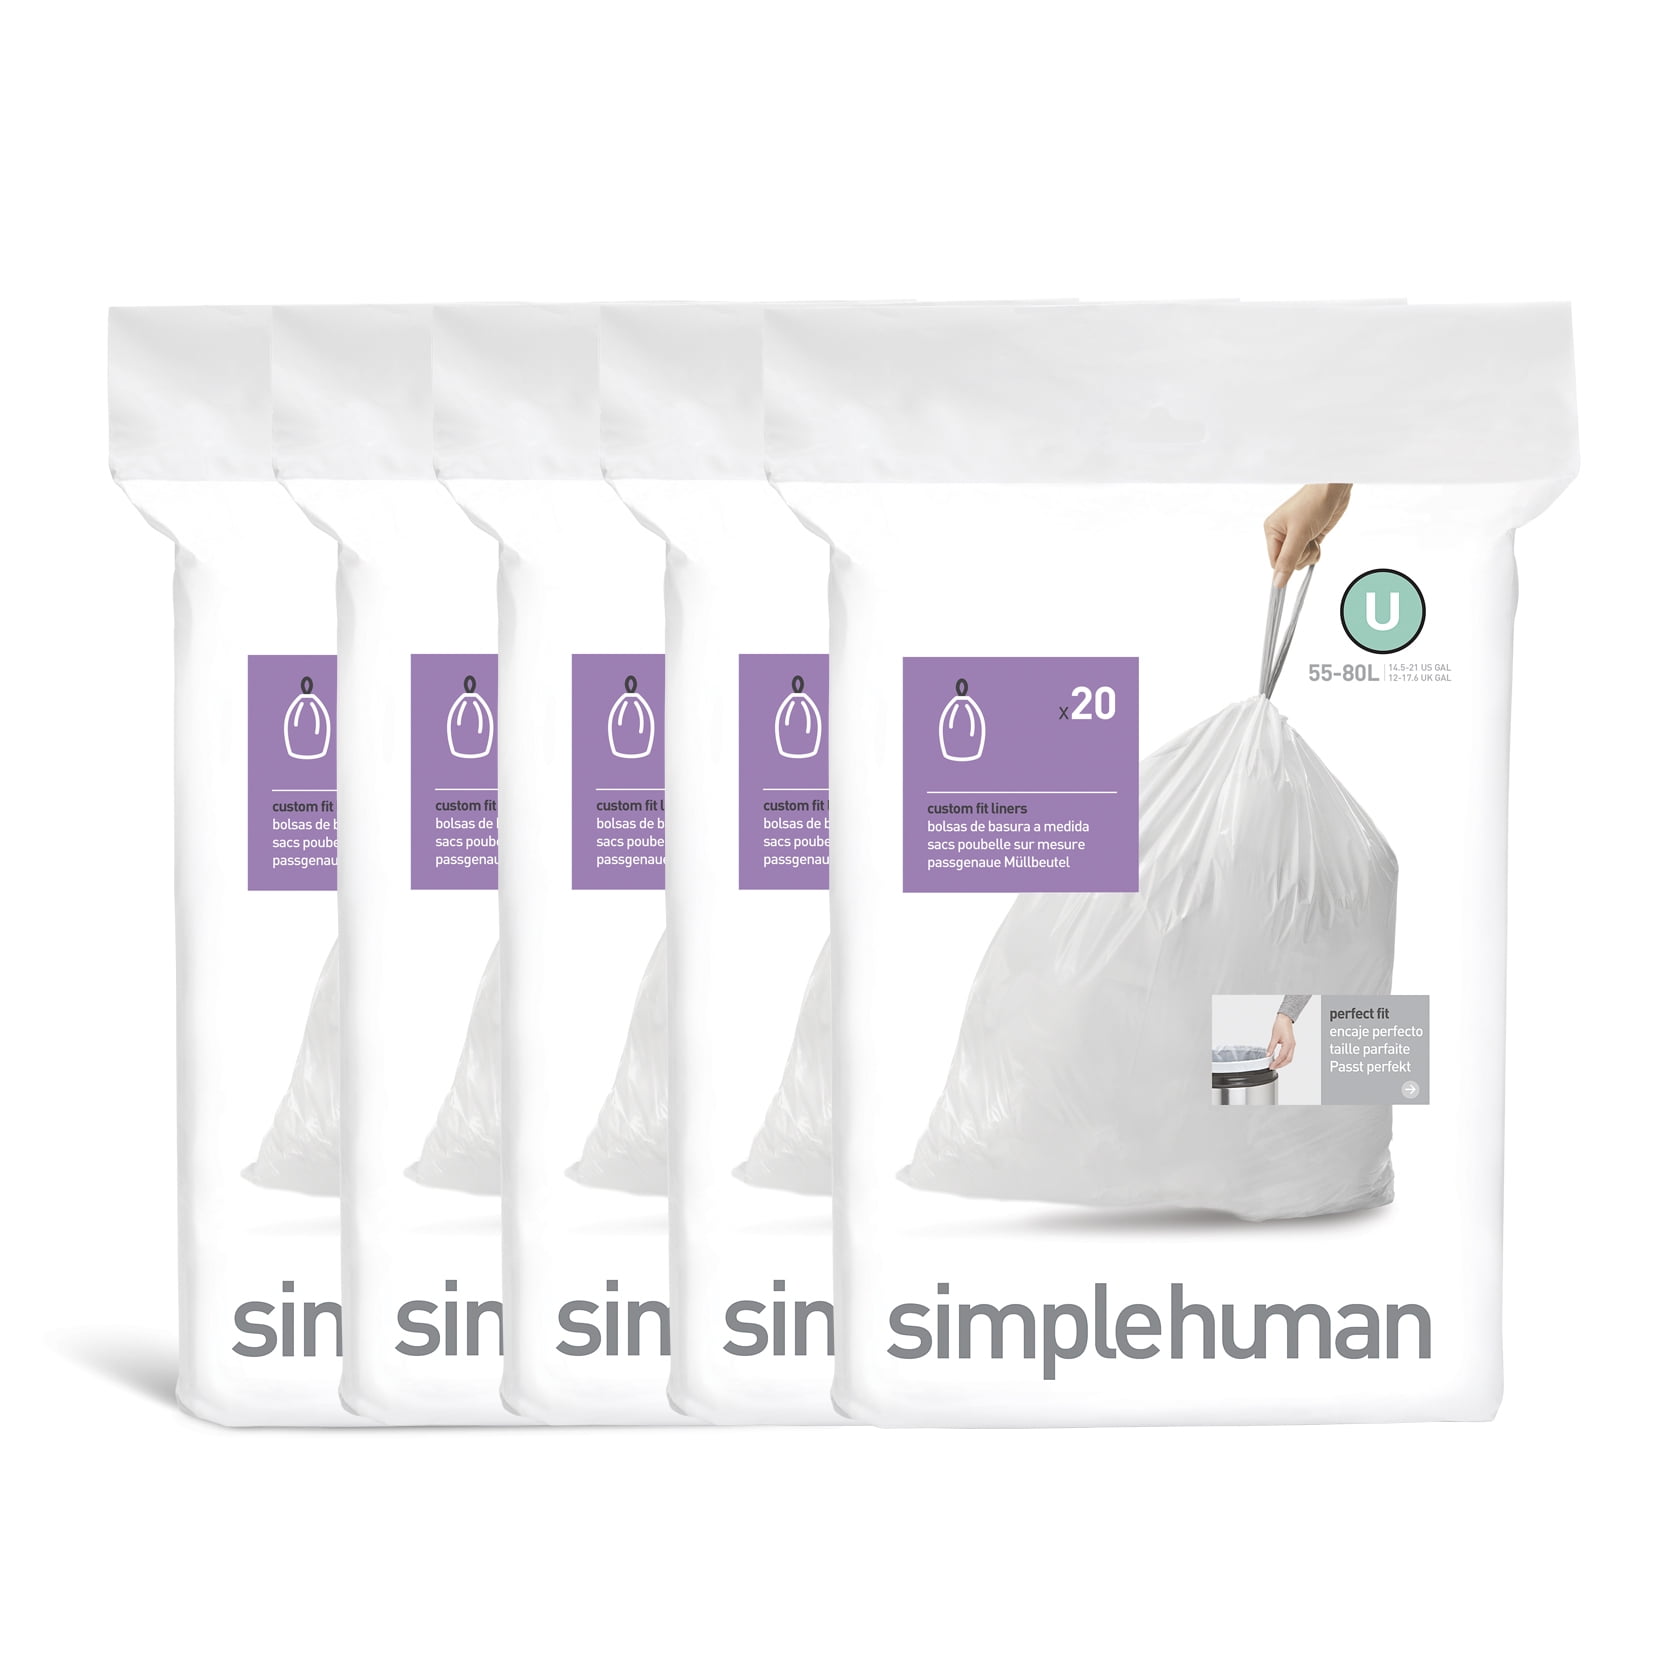 Code Q 20 Ct SIMPLEHUMAN Custom Fit Trash Bags Can Liners Refill Size White Pack 